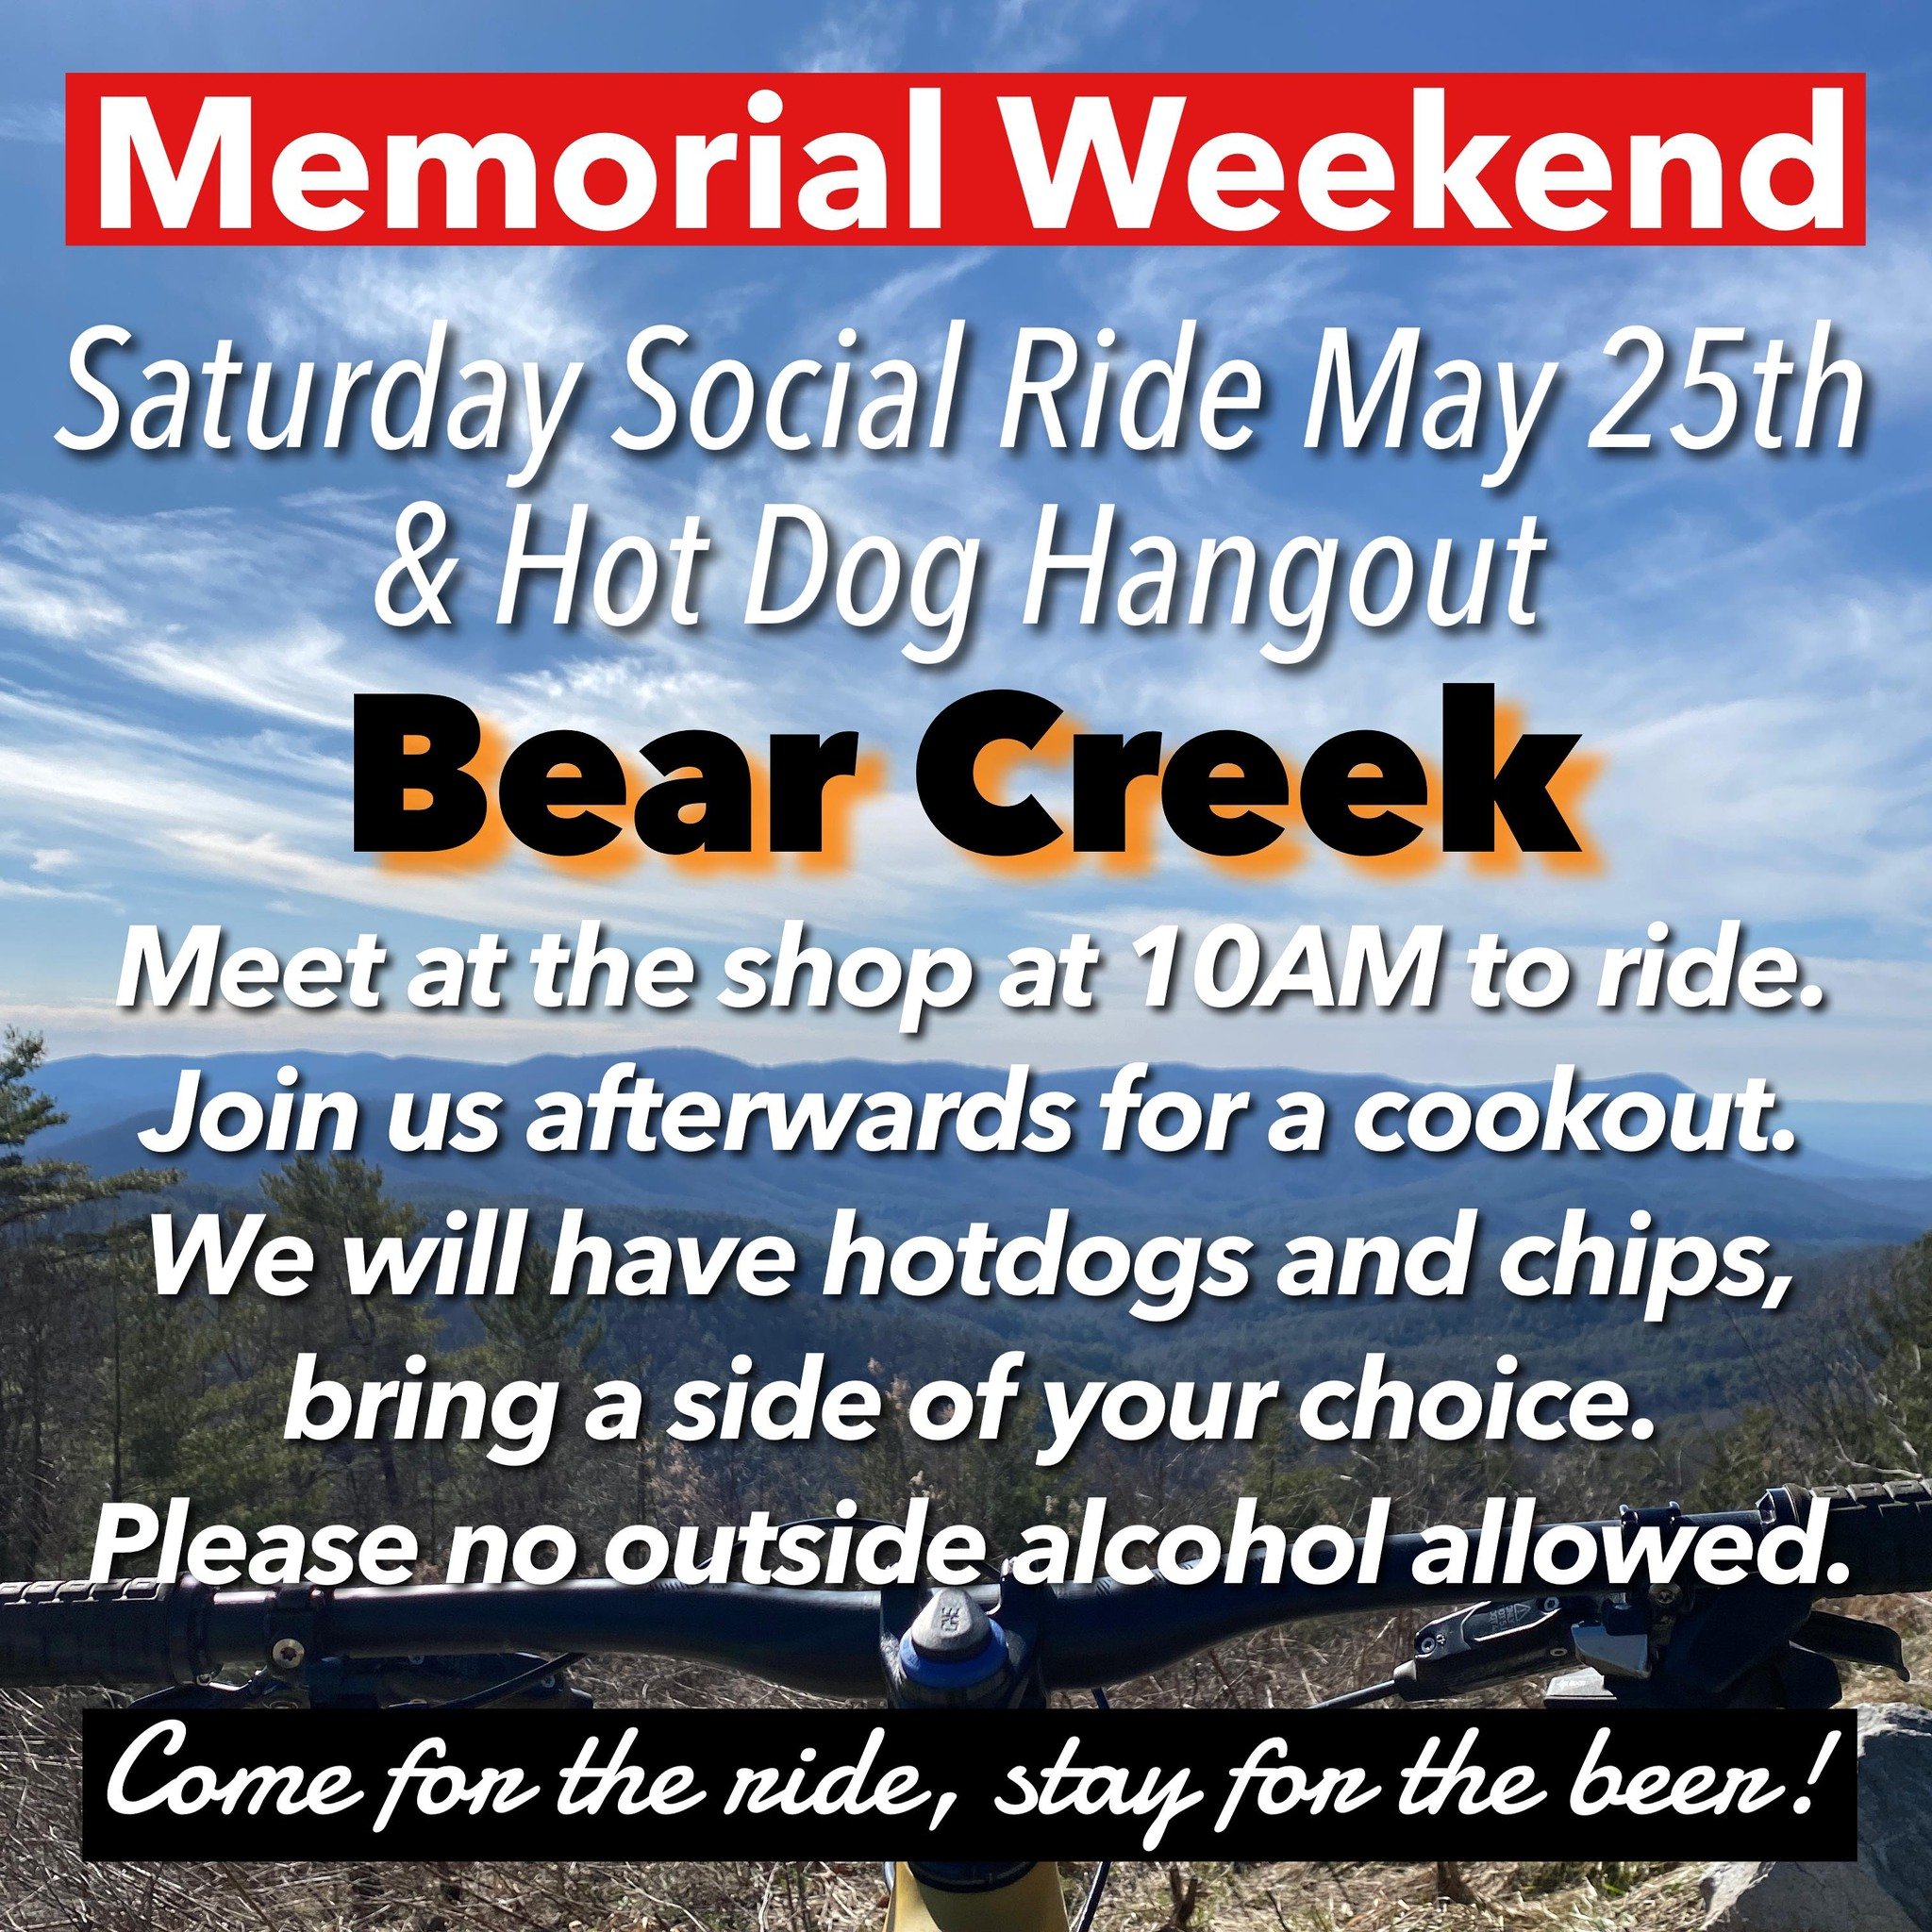 Mark your calendar! Join us for an awesome ride and stay afterwards as we grill hotdogs. Bring a side dish if you like, we have room in tha fridge! Sorry no outside alcohol allowed but all other drinks are welcome. See you there!